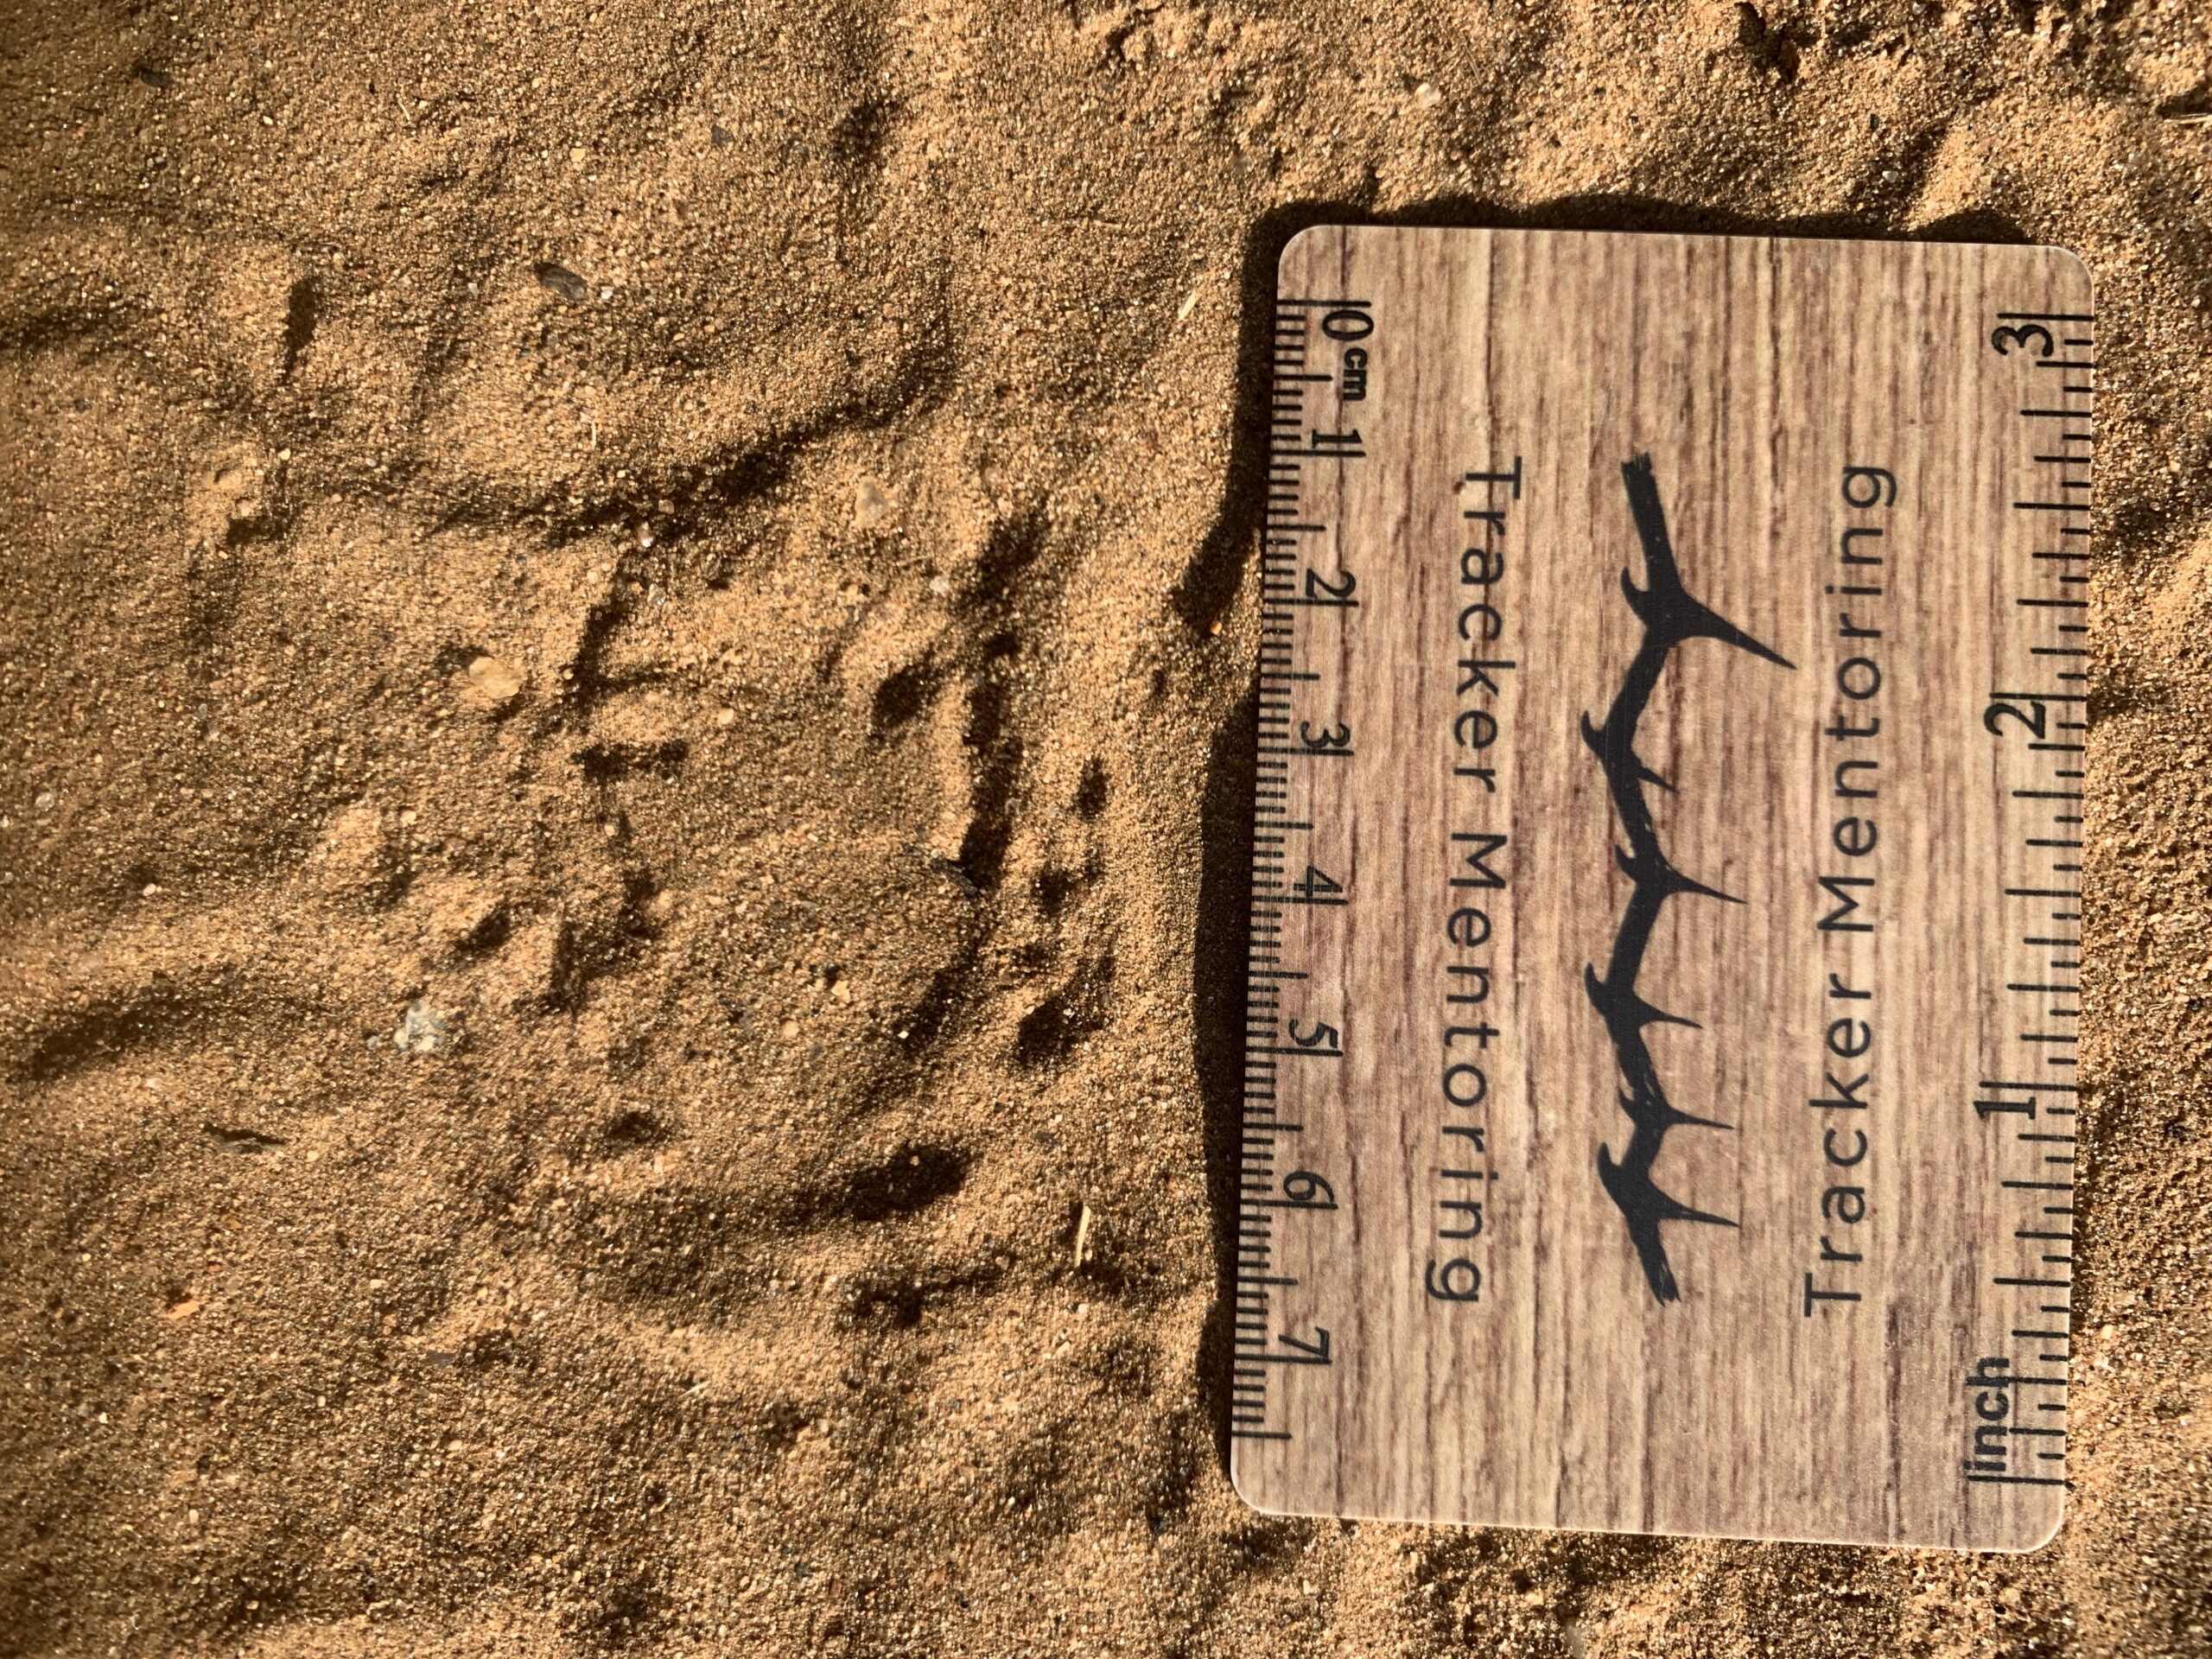 Frog tracks with body print, Makalali, South Africa, August 2023 quiz